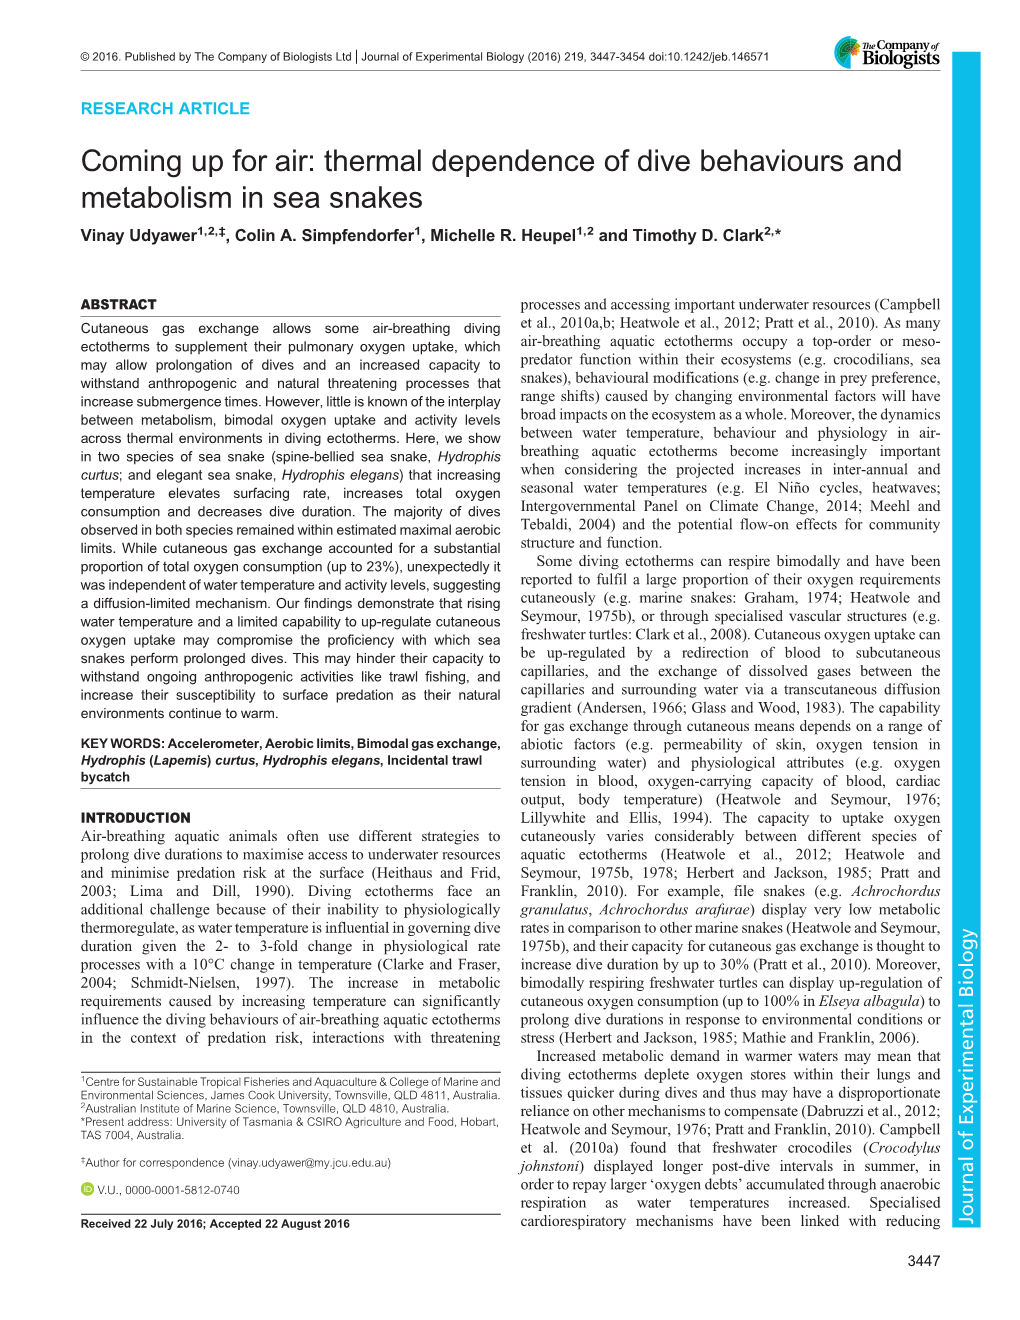 Thermal Dependence of Dive Behaviours and Metabolism in Sea Snakes Vinay Udyawer1,2,‡, Colin A